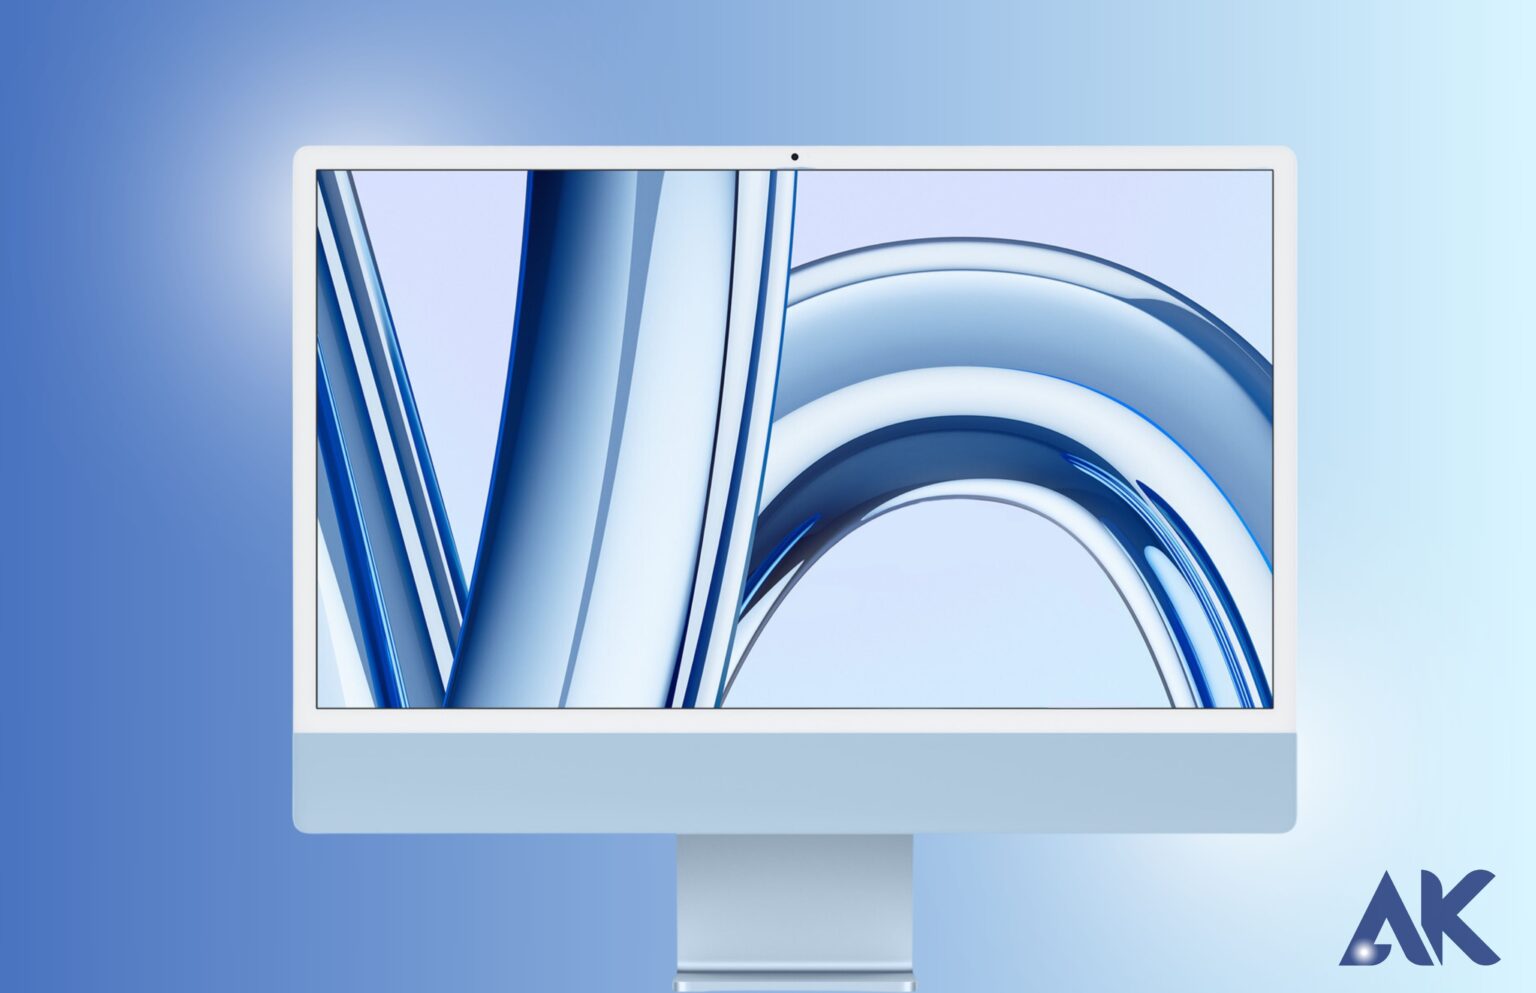 M3 iMac Display: Brighter, Sharper, and More Colour Accurate Than Ever Before